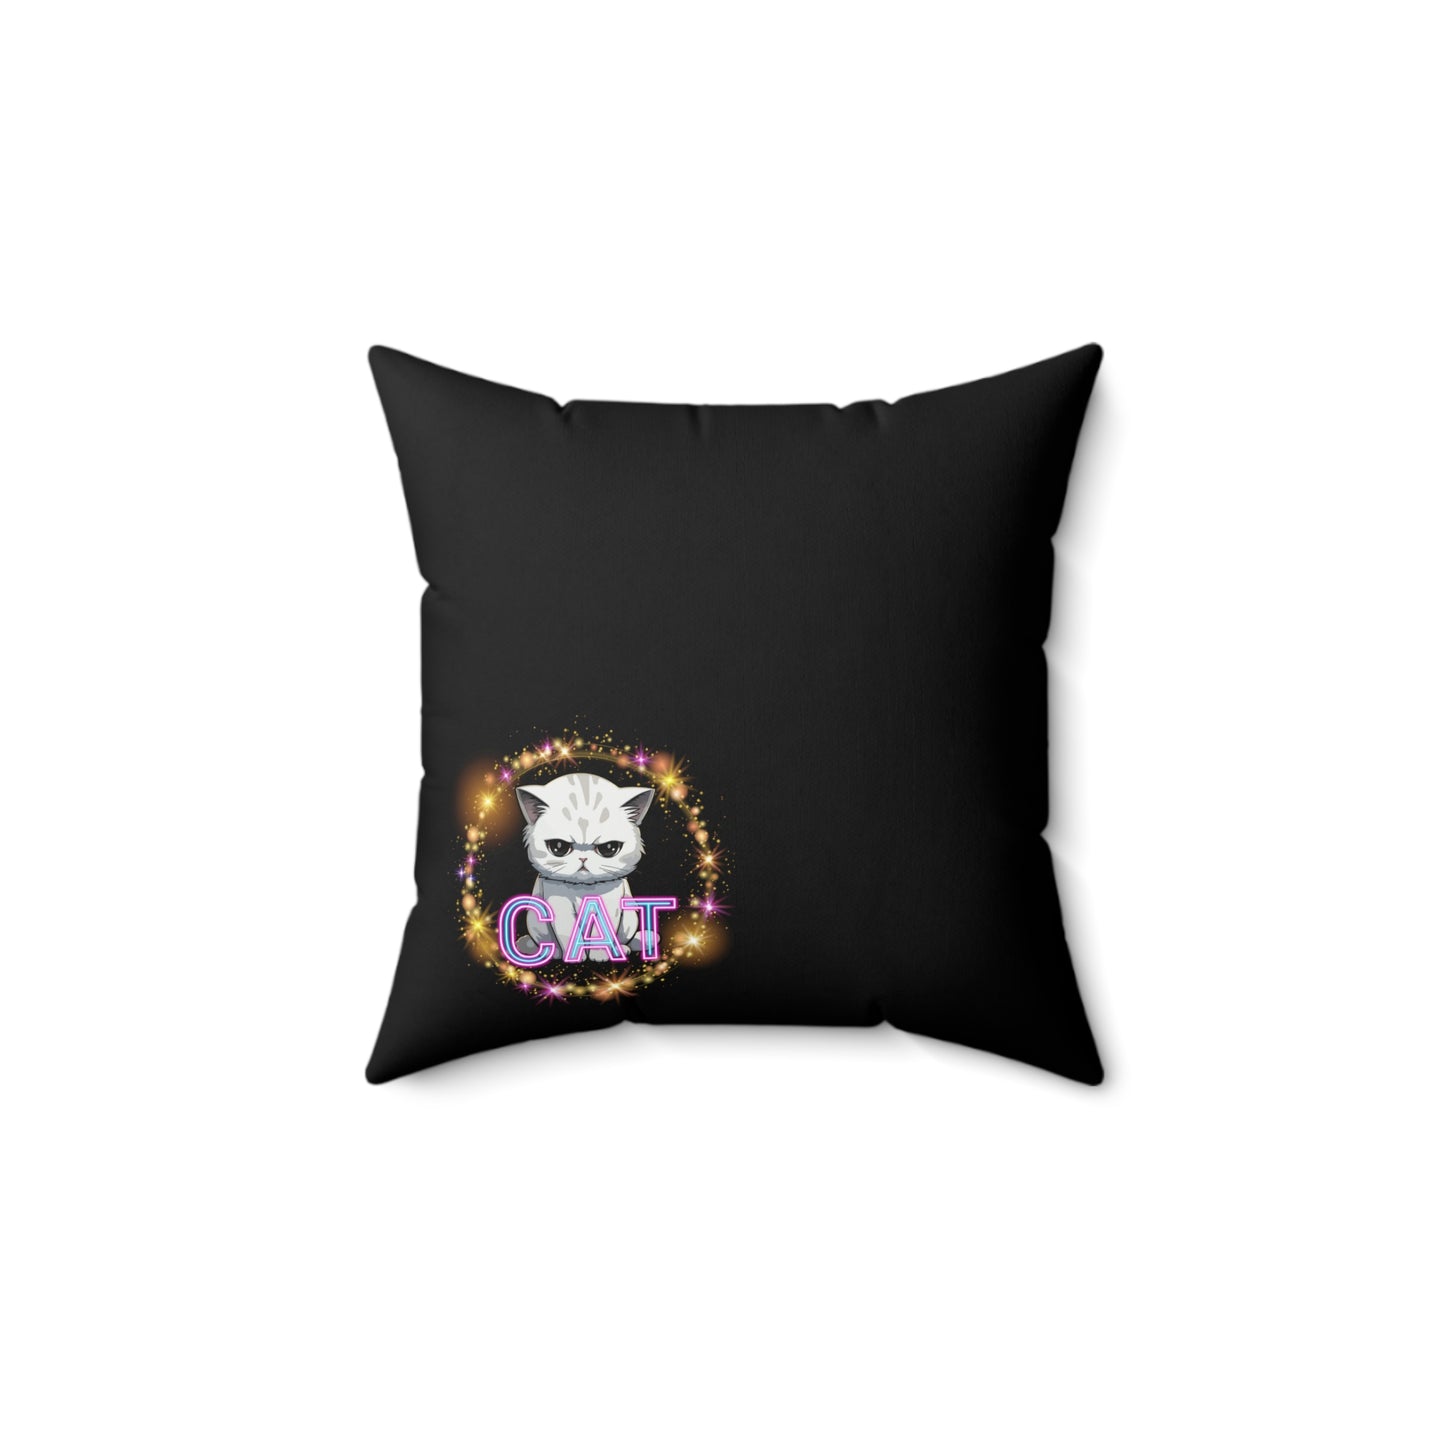 CAT Colorful logo with Cute Cat Design Spun Polyester Square Pillow